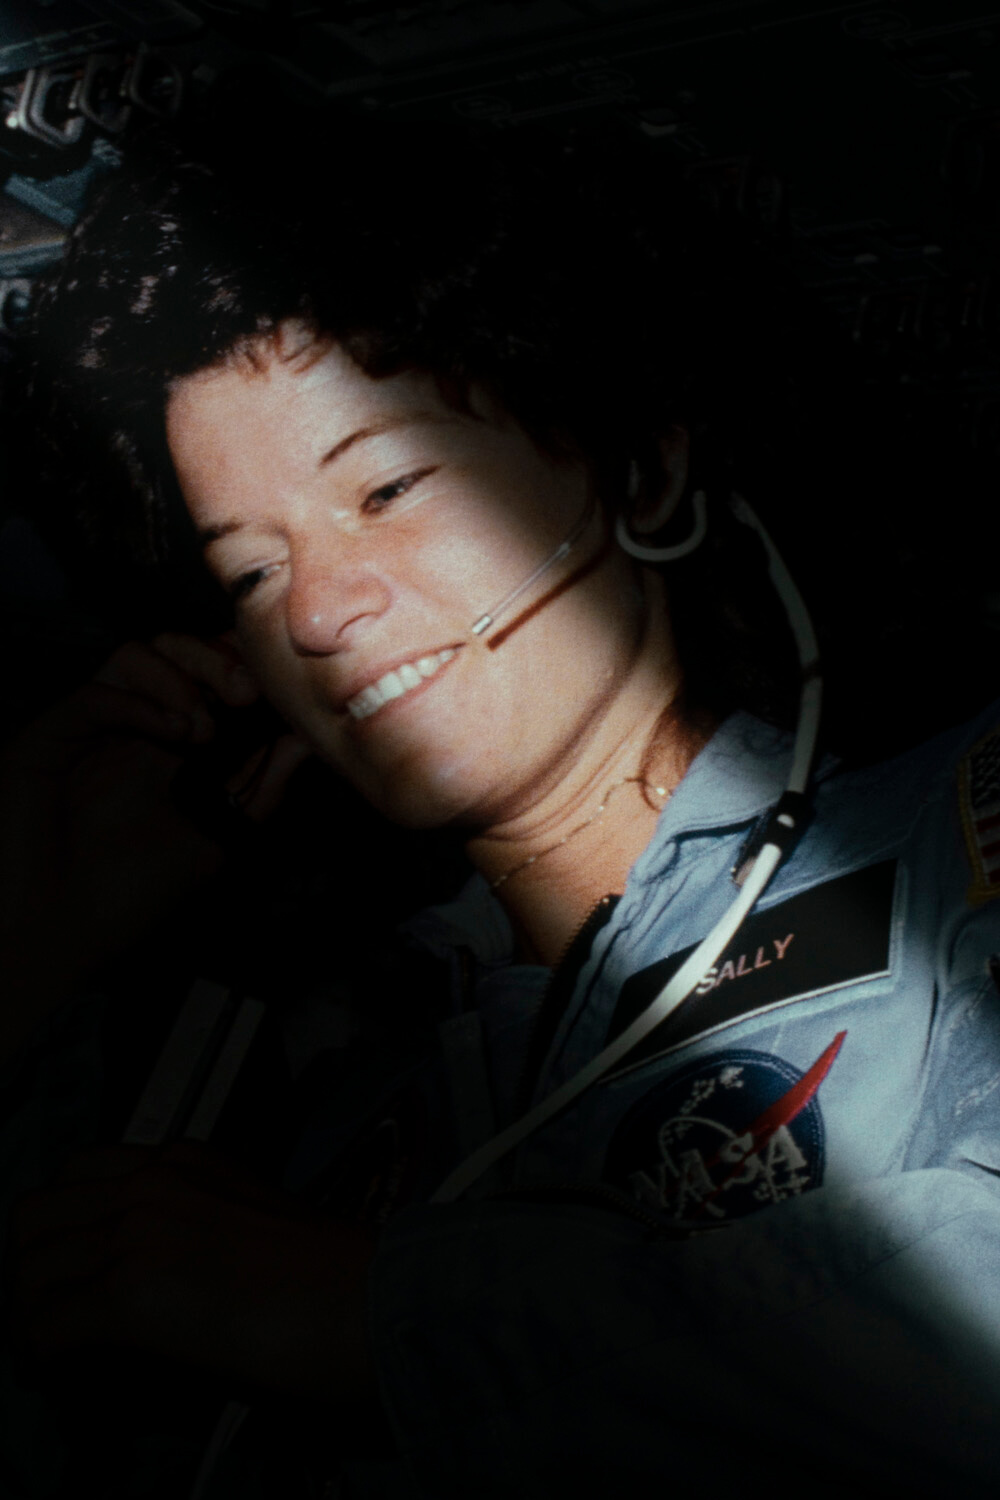 An astronaut in a space shuttle, illuminated by a shaft of light, converses on a headset, epitomizing human achievement and exploration.